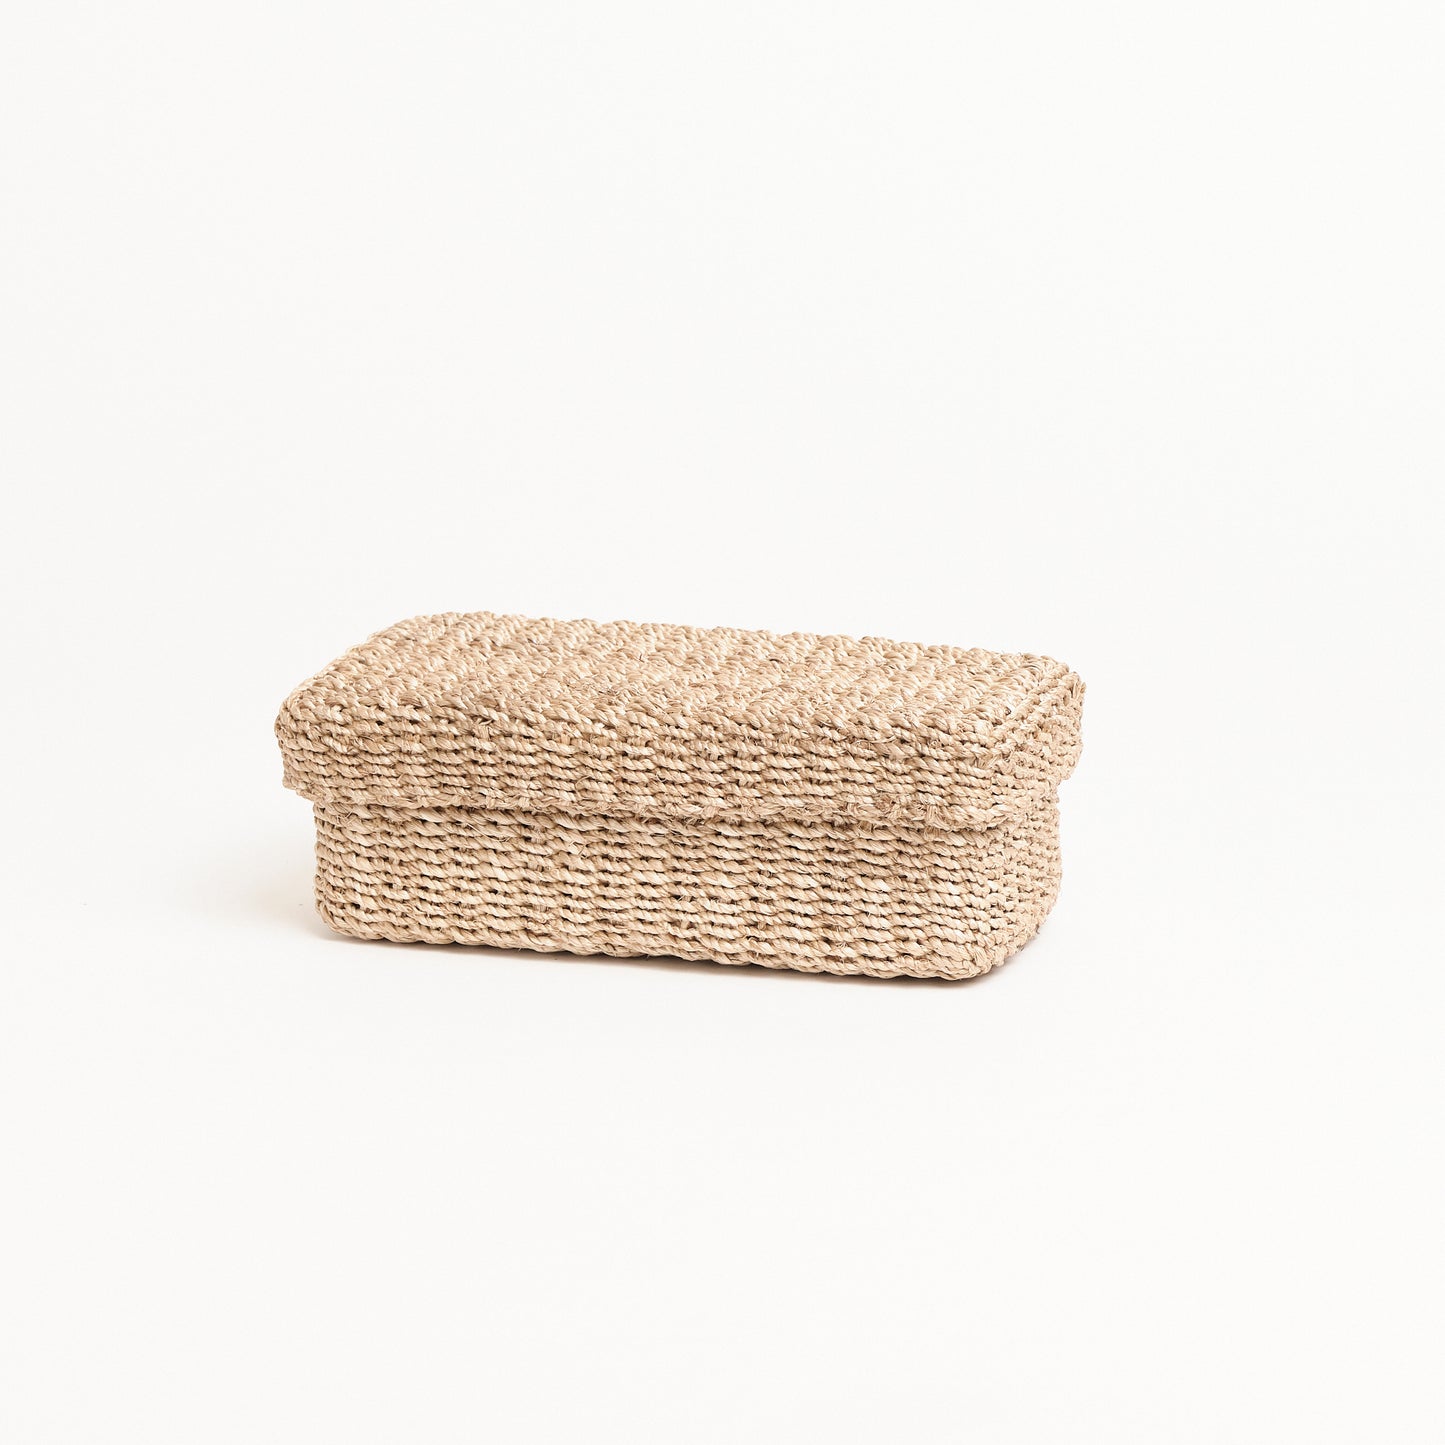 Abaca Twine Utensil Organizer With Cover (Plain)